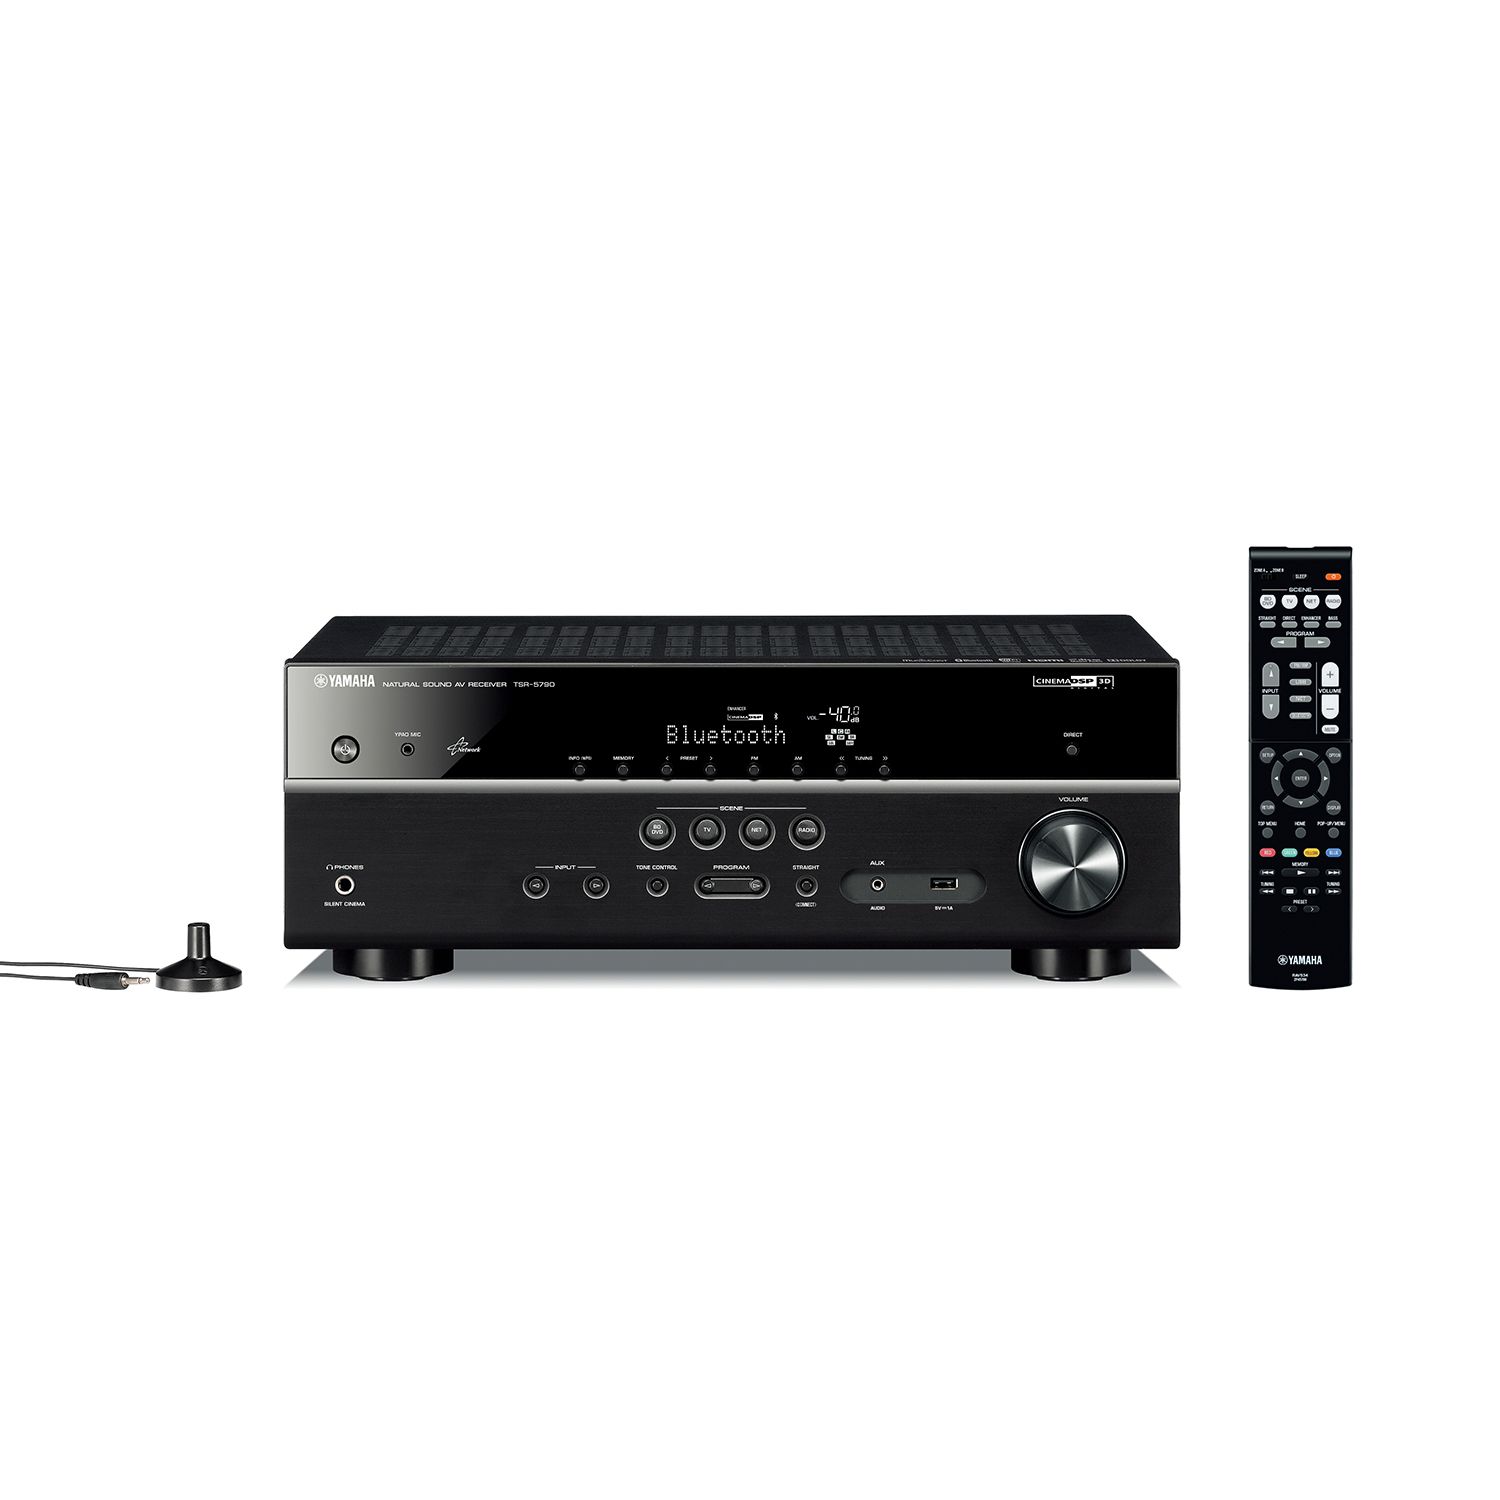 TSR-5790BL - Overview - AV Receivers - Audio & Visual - Products